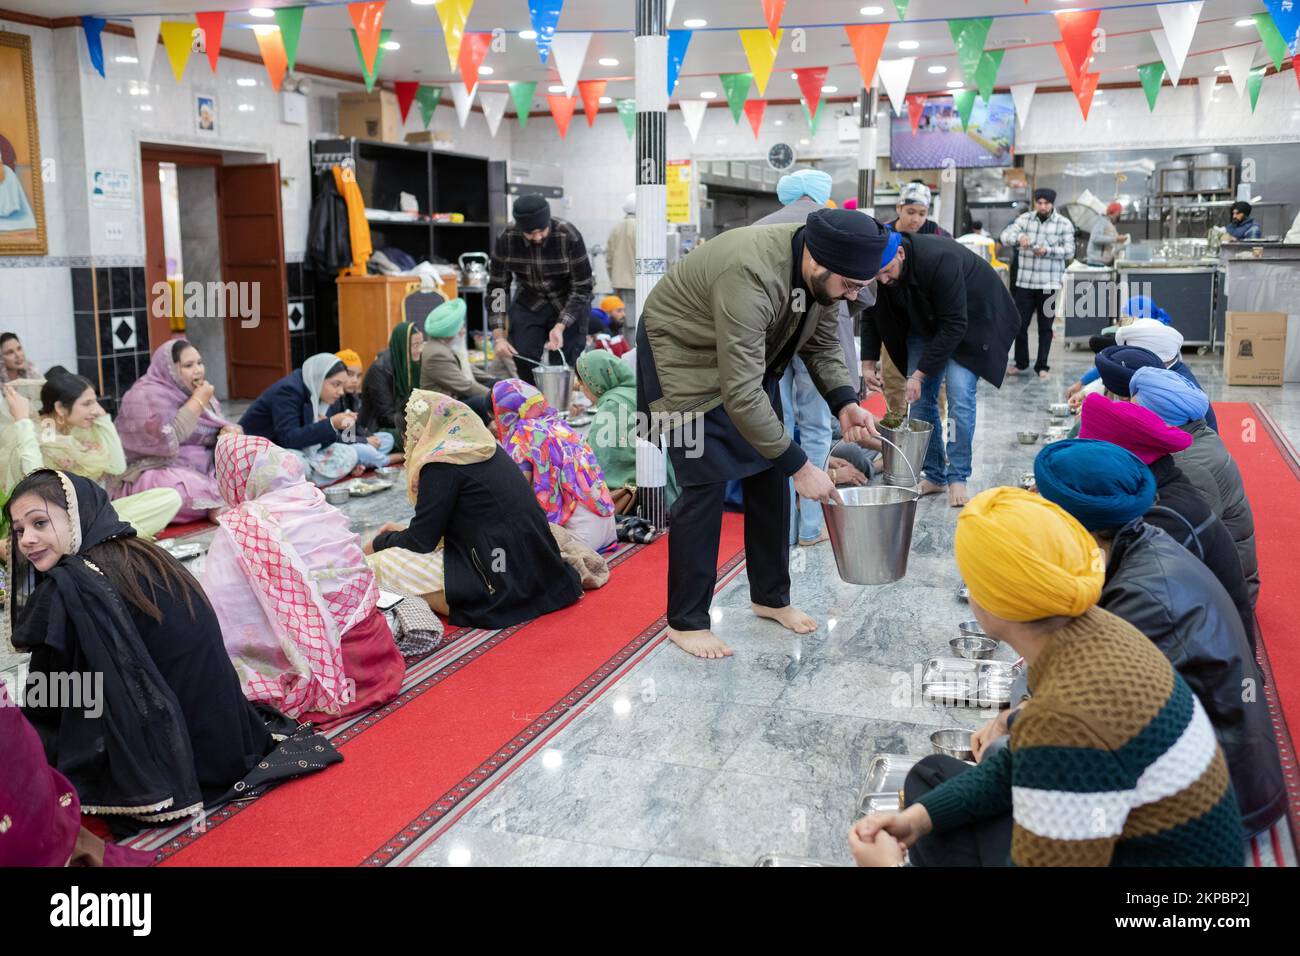 LANGAR. Volunteers at a Sikh temple distribute vegetarian food to worshippers and visitors. At a temple in Richmond Hill, Queens, New York City. Stock Photo